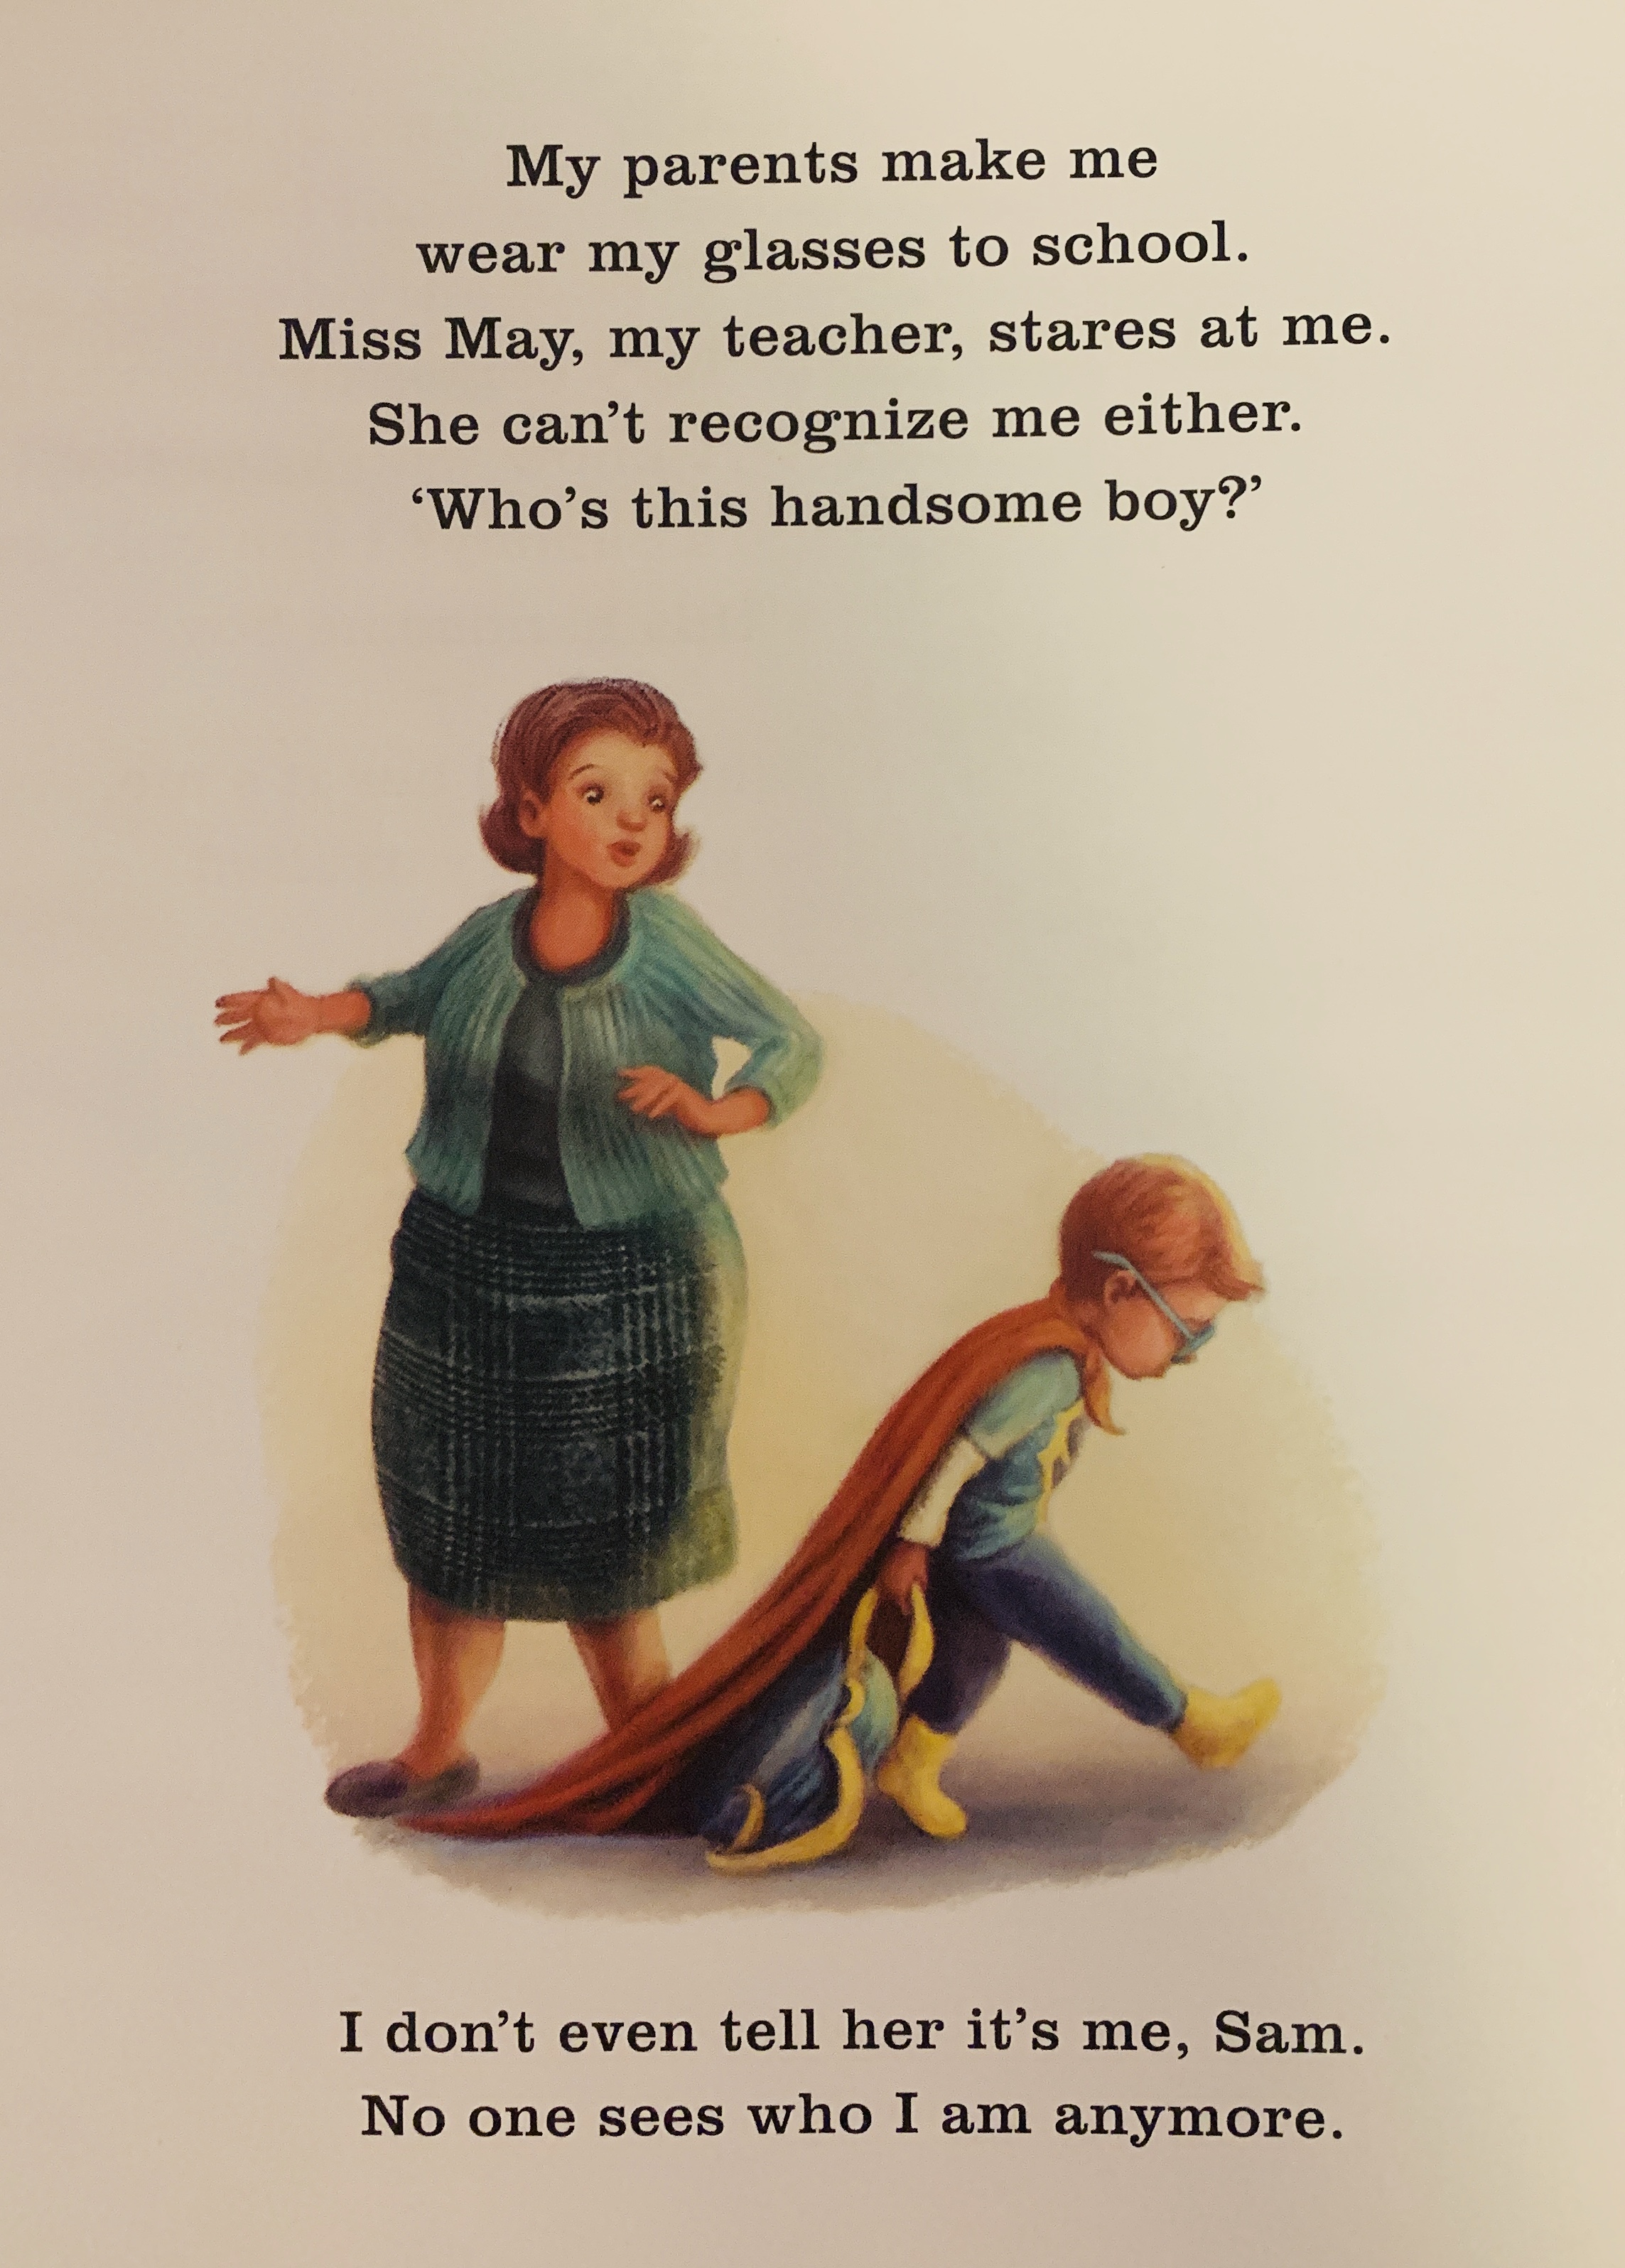 [Image description: page from the book with a teacher looking concerned at Sammy, a young boy in a superhero cape and glasses. Sammy looks sad as he walks away.  Text on the page reads, "My parents make me wear my glasses to school. Miss May, my teacher stares at me. She can't recognize me either. 'Who's this handsome boy?' I don't even tell her it's me, Sam. No one sees who I am anymore."]